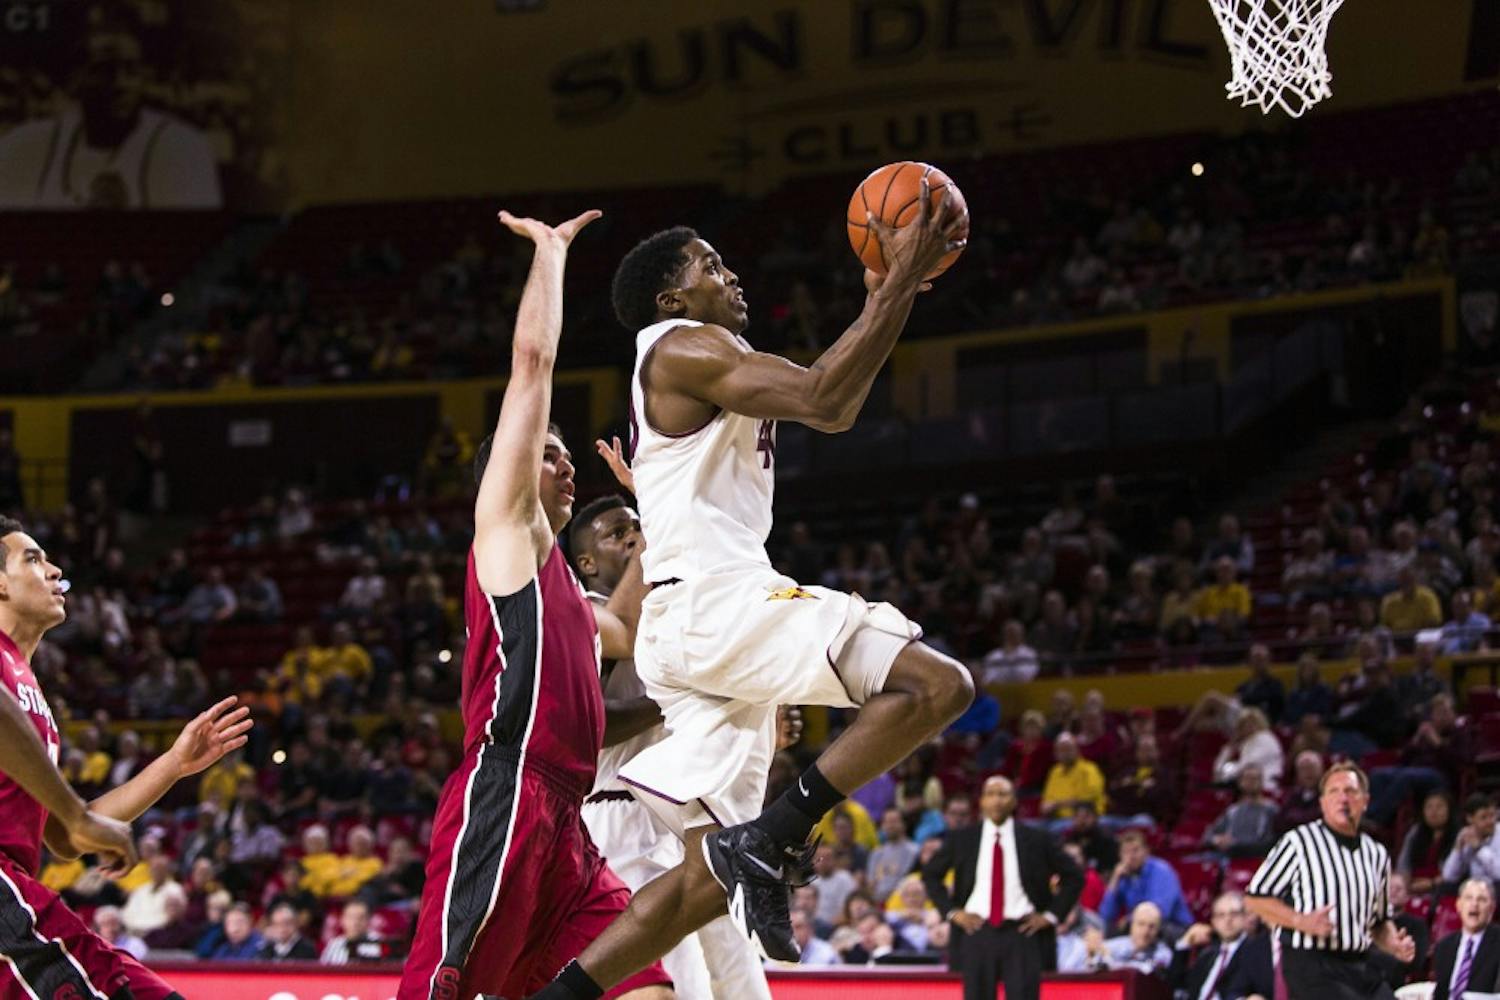 ASU senior forward Shaquielle McKissic drives to the hoop at the ASU vs. Stanford basketball game at the Wells Fargo Arena on March 5, 2015. McKissic had a team leading 23 points. (Daniel Kwon/The State Press)